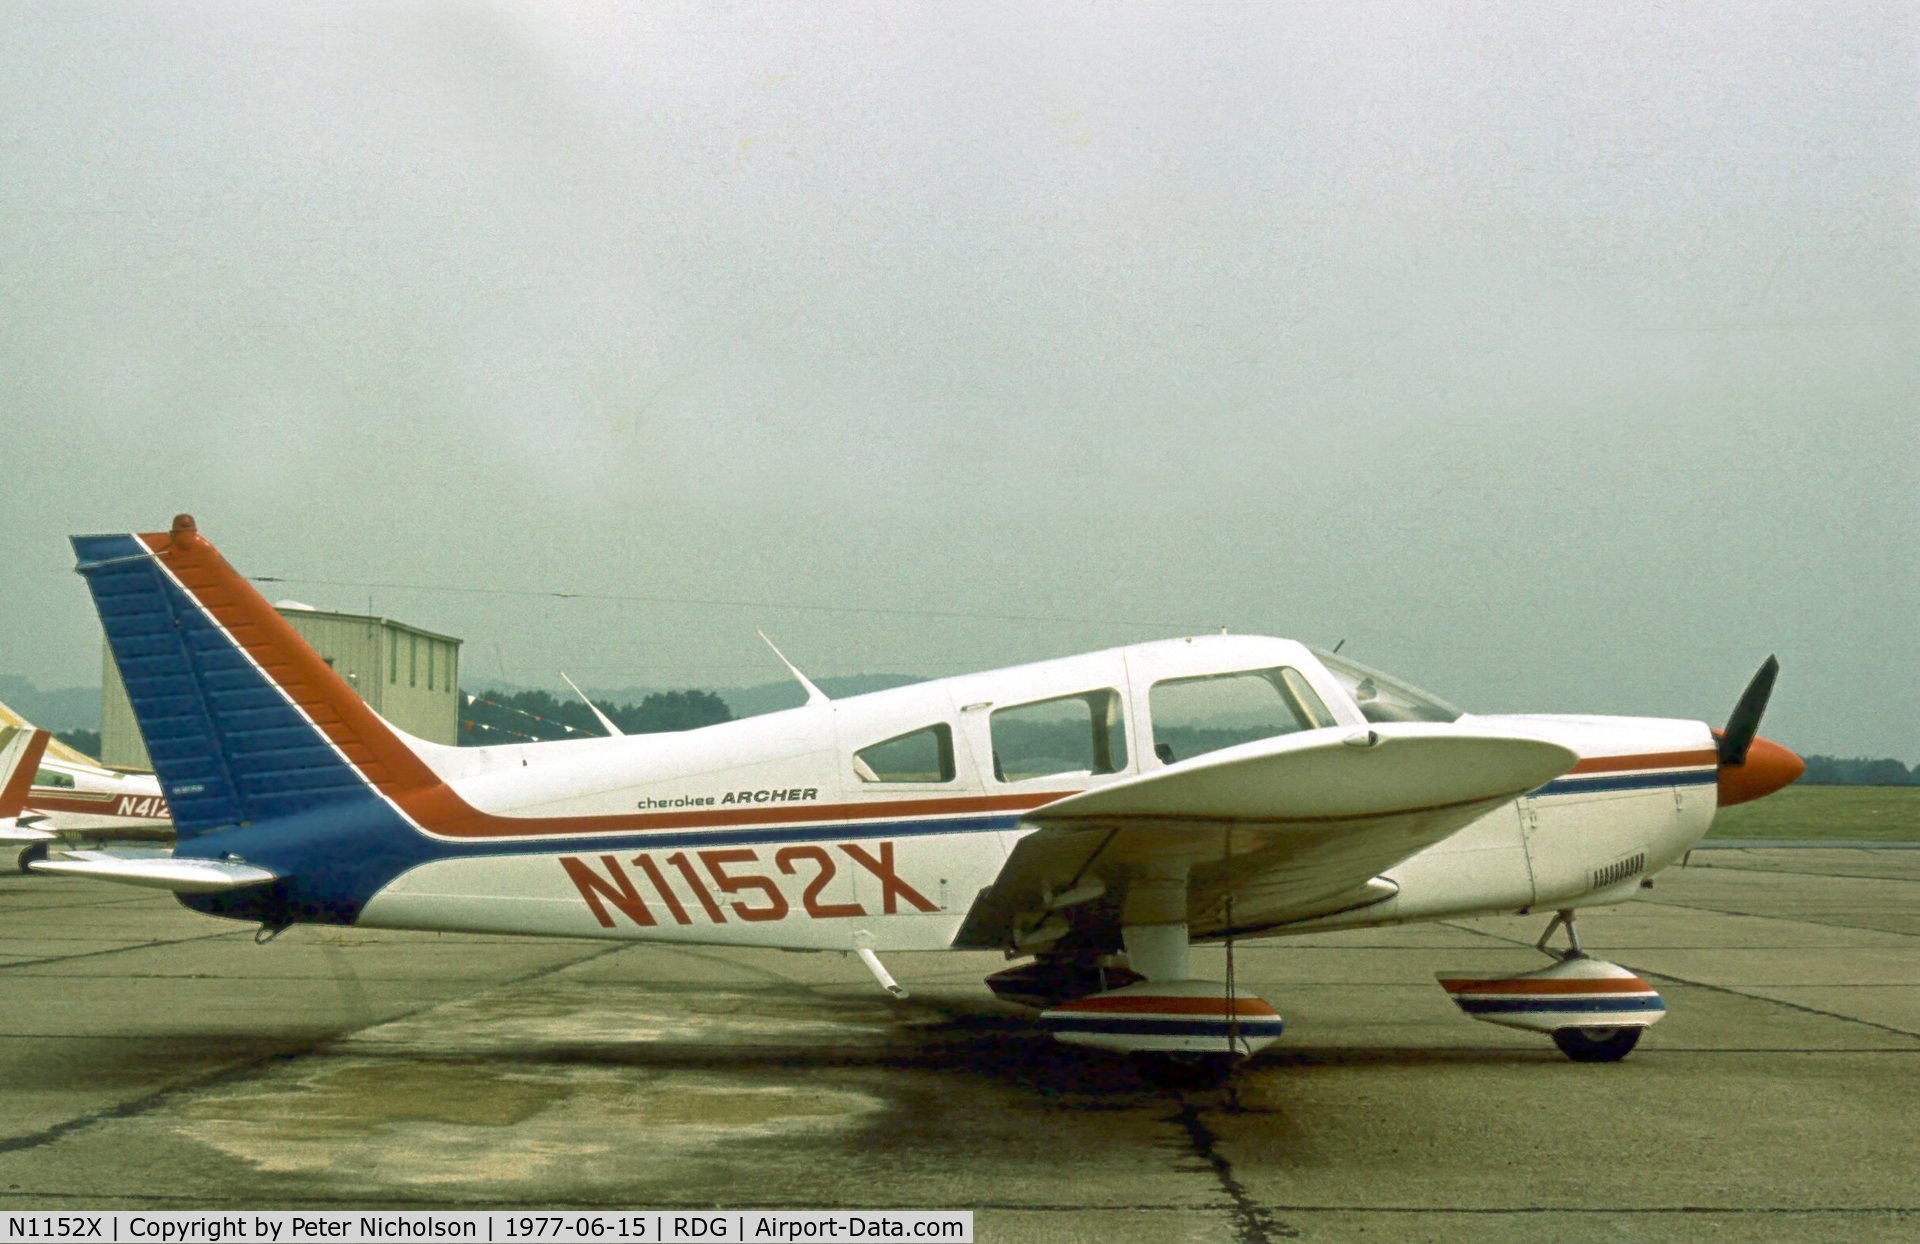 N1152X, 1975 Piper PA-28-180 C/N 28-7505216, This Cherokee Archer was present at the 1977 Reading Airshow.